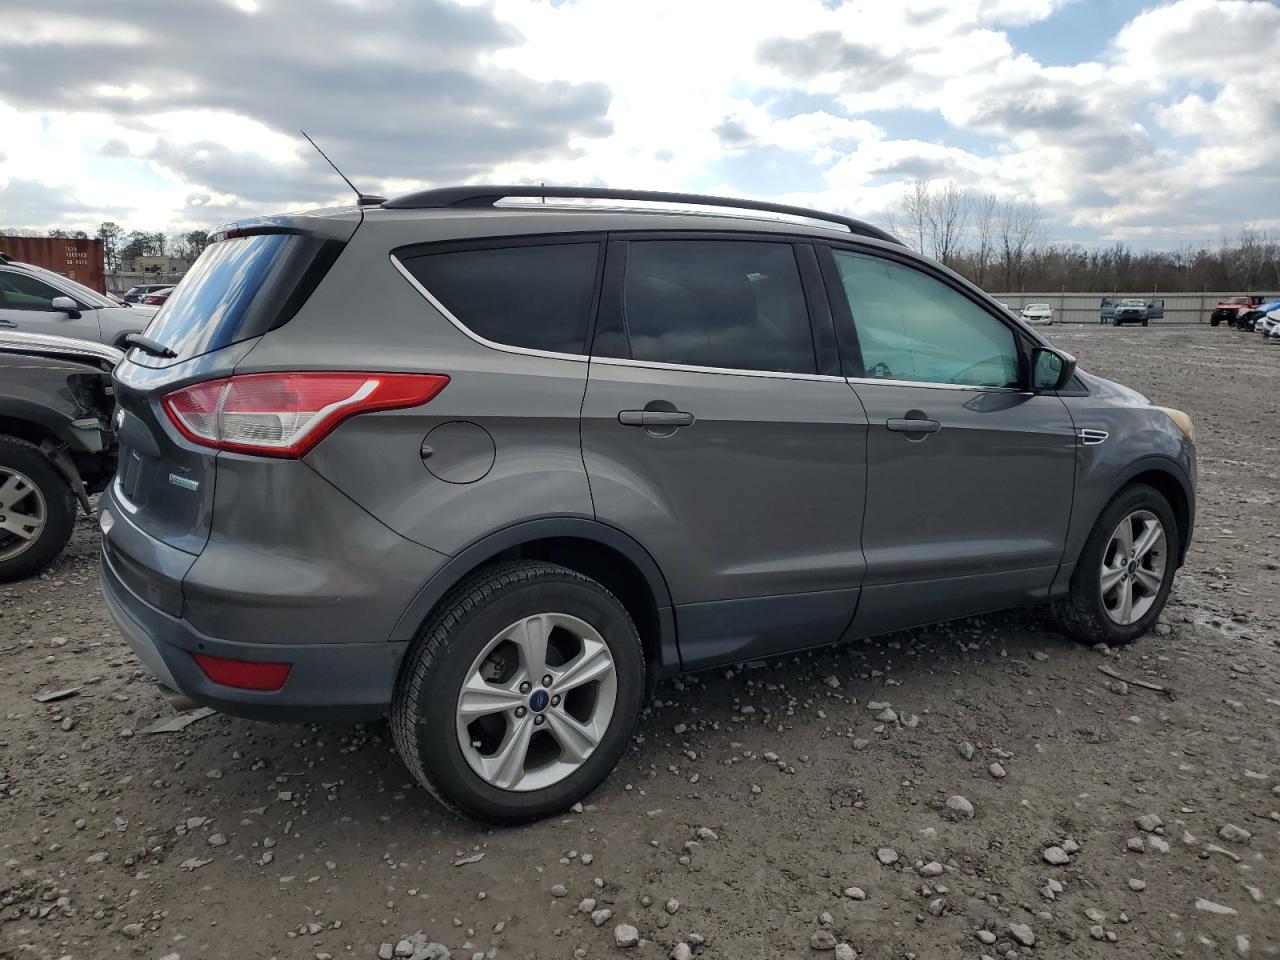 1FMCU0GX5EU****** Salvage and Repairable 2014 Ford Escape in AL - Hueytown